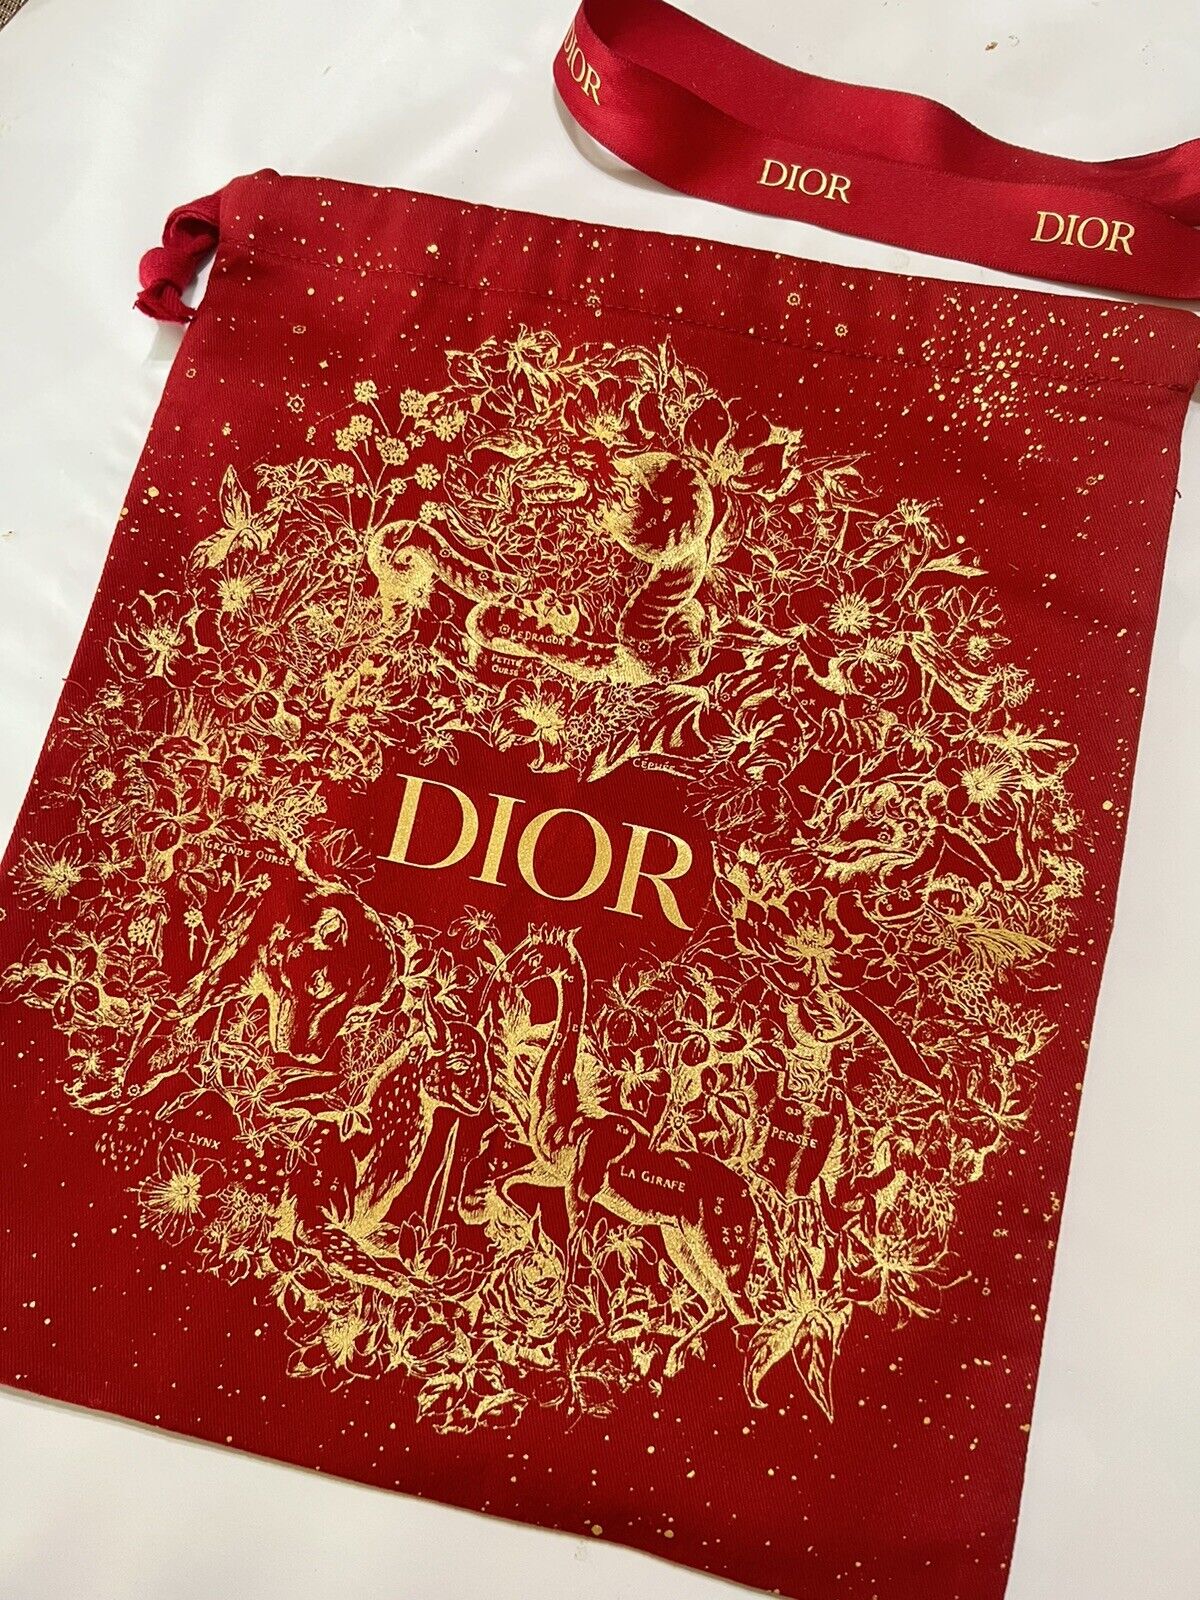 Dior 2023 Chinese Lunar New Year Lucky Red Pouch Limited Edition 9 x 11 in